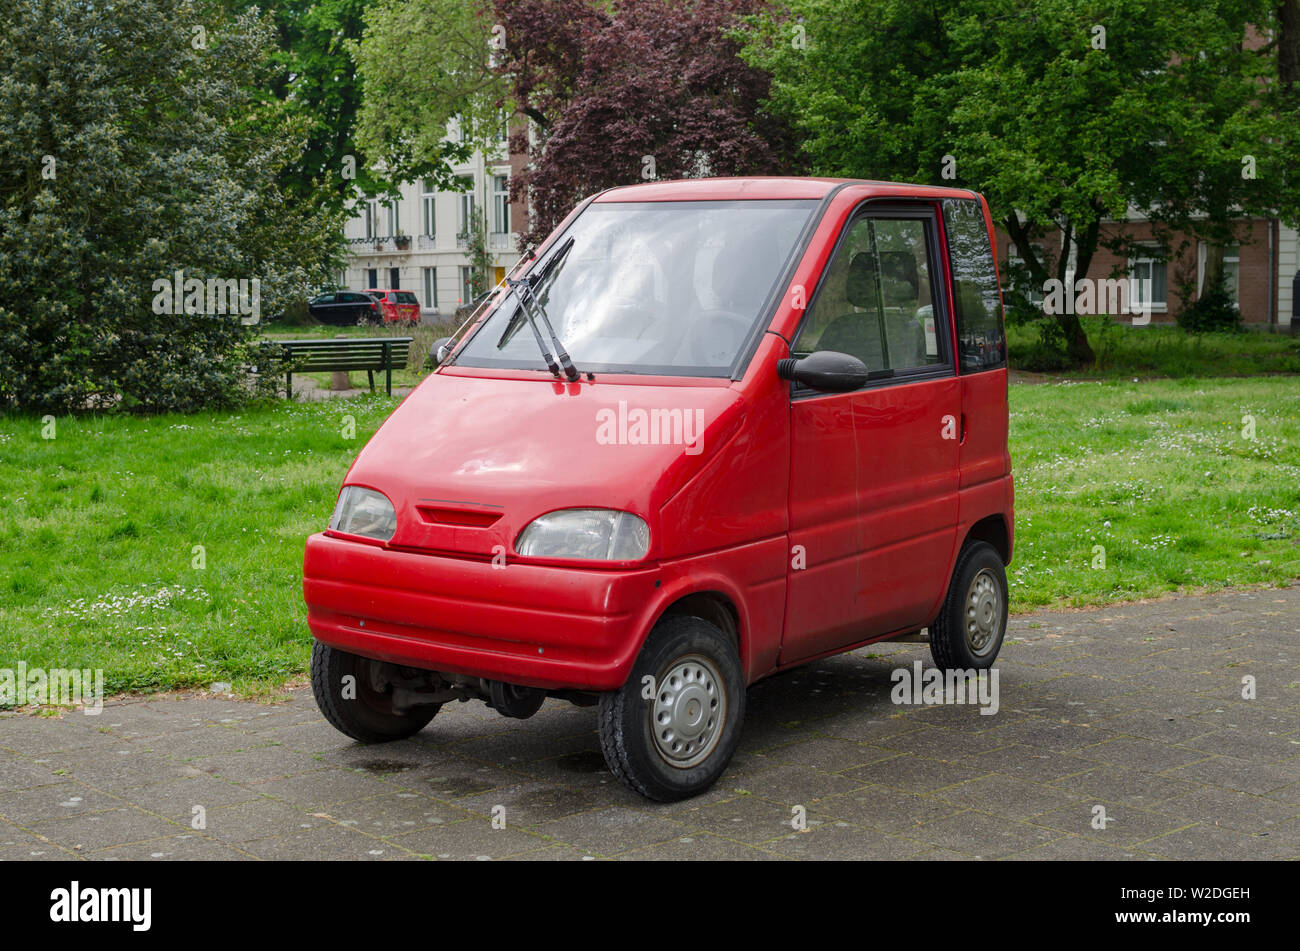 Amsterdam, Netherlands - May 03 2019: Small red car for two persons. Canta LX. Stock Photo